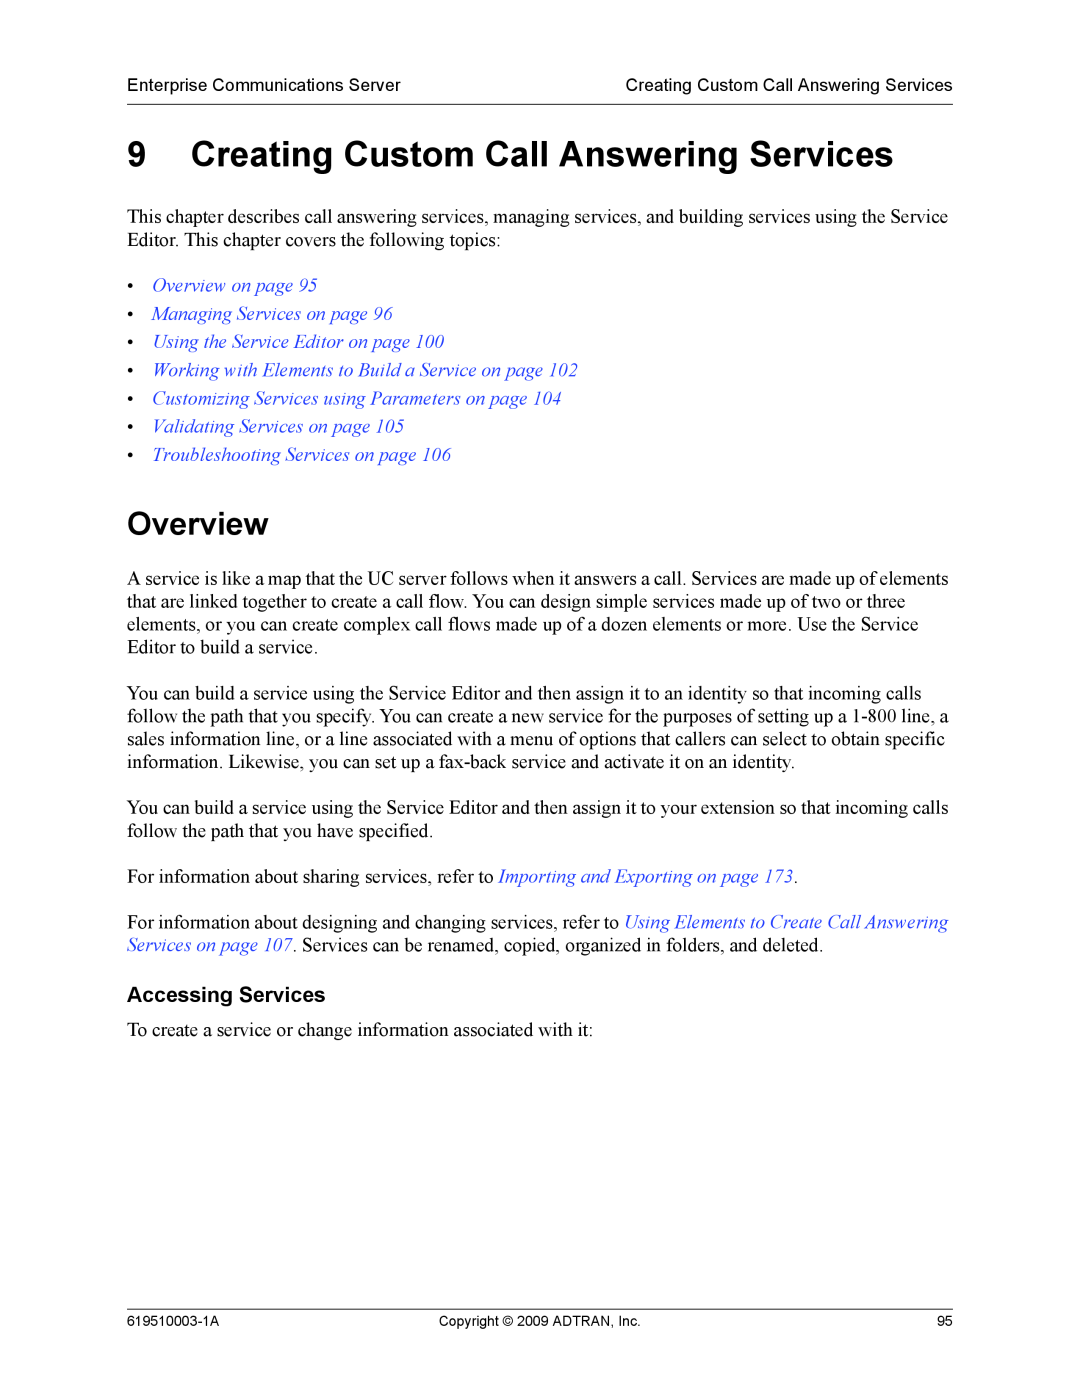 ADTRAN 619510003-1A manual Creating Custom Call Answering Services, Accessing Services, Using the Service Editor on page 